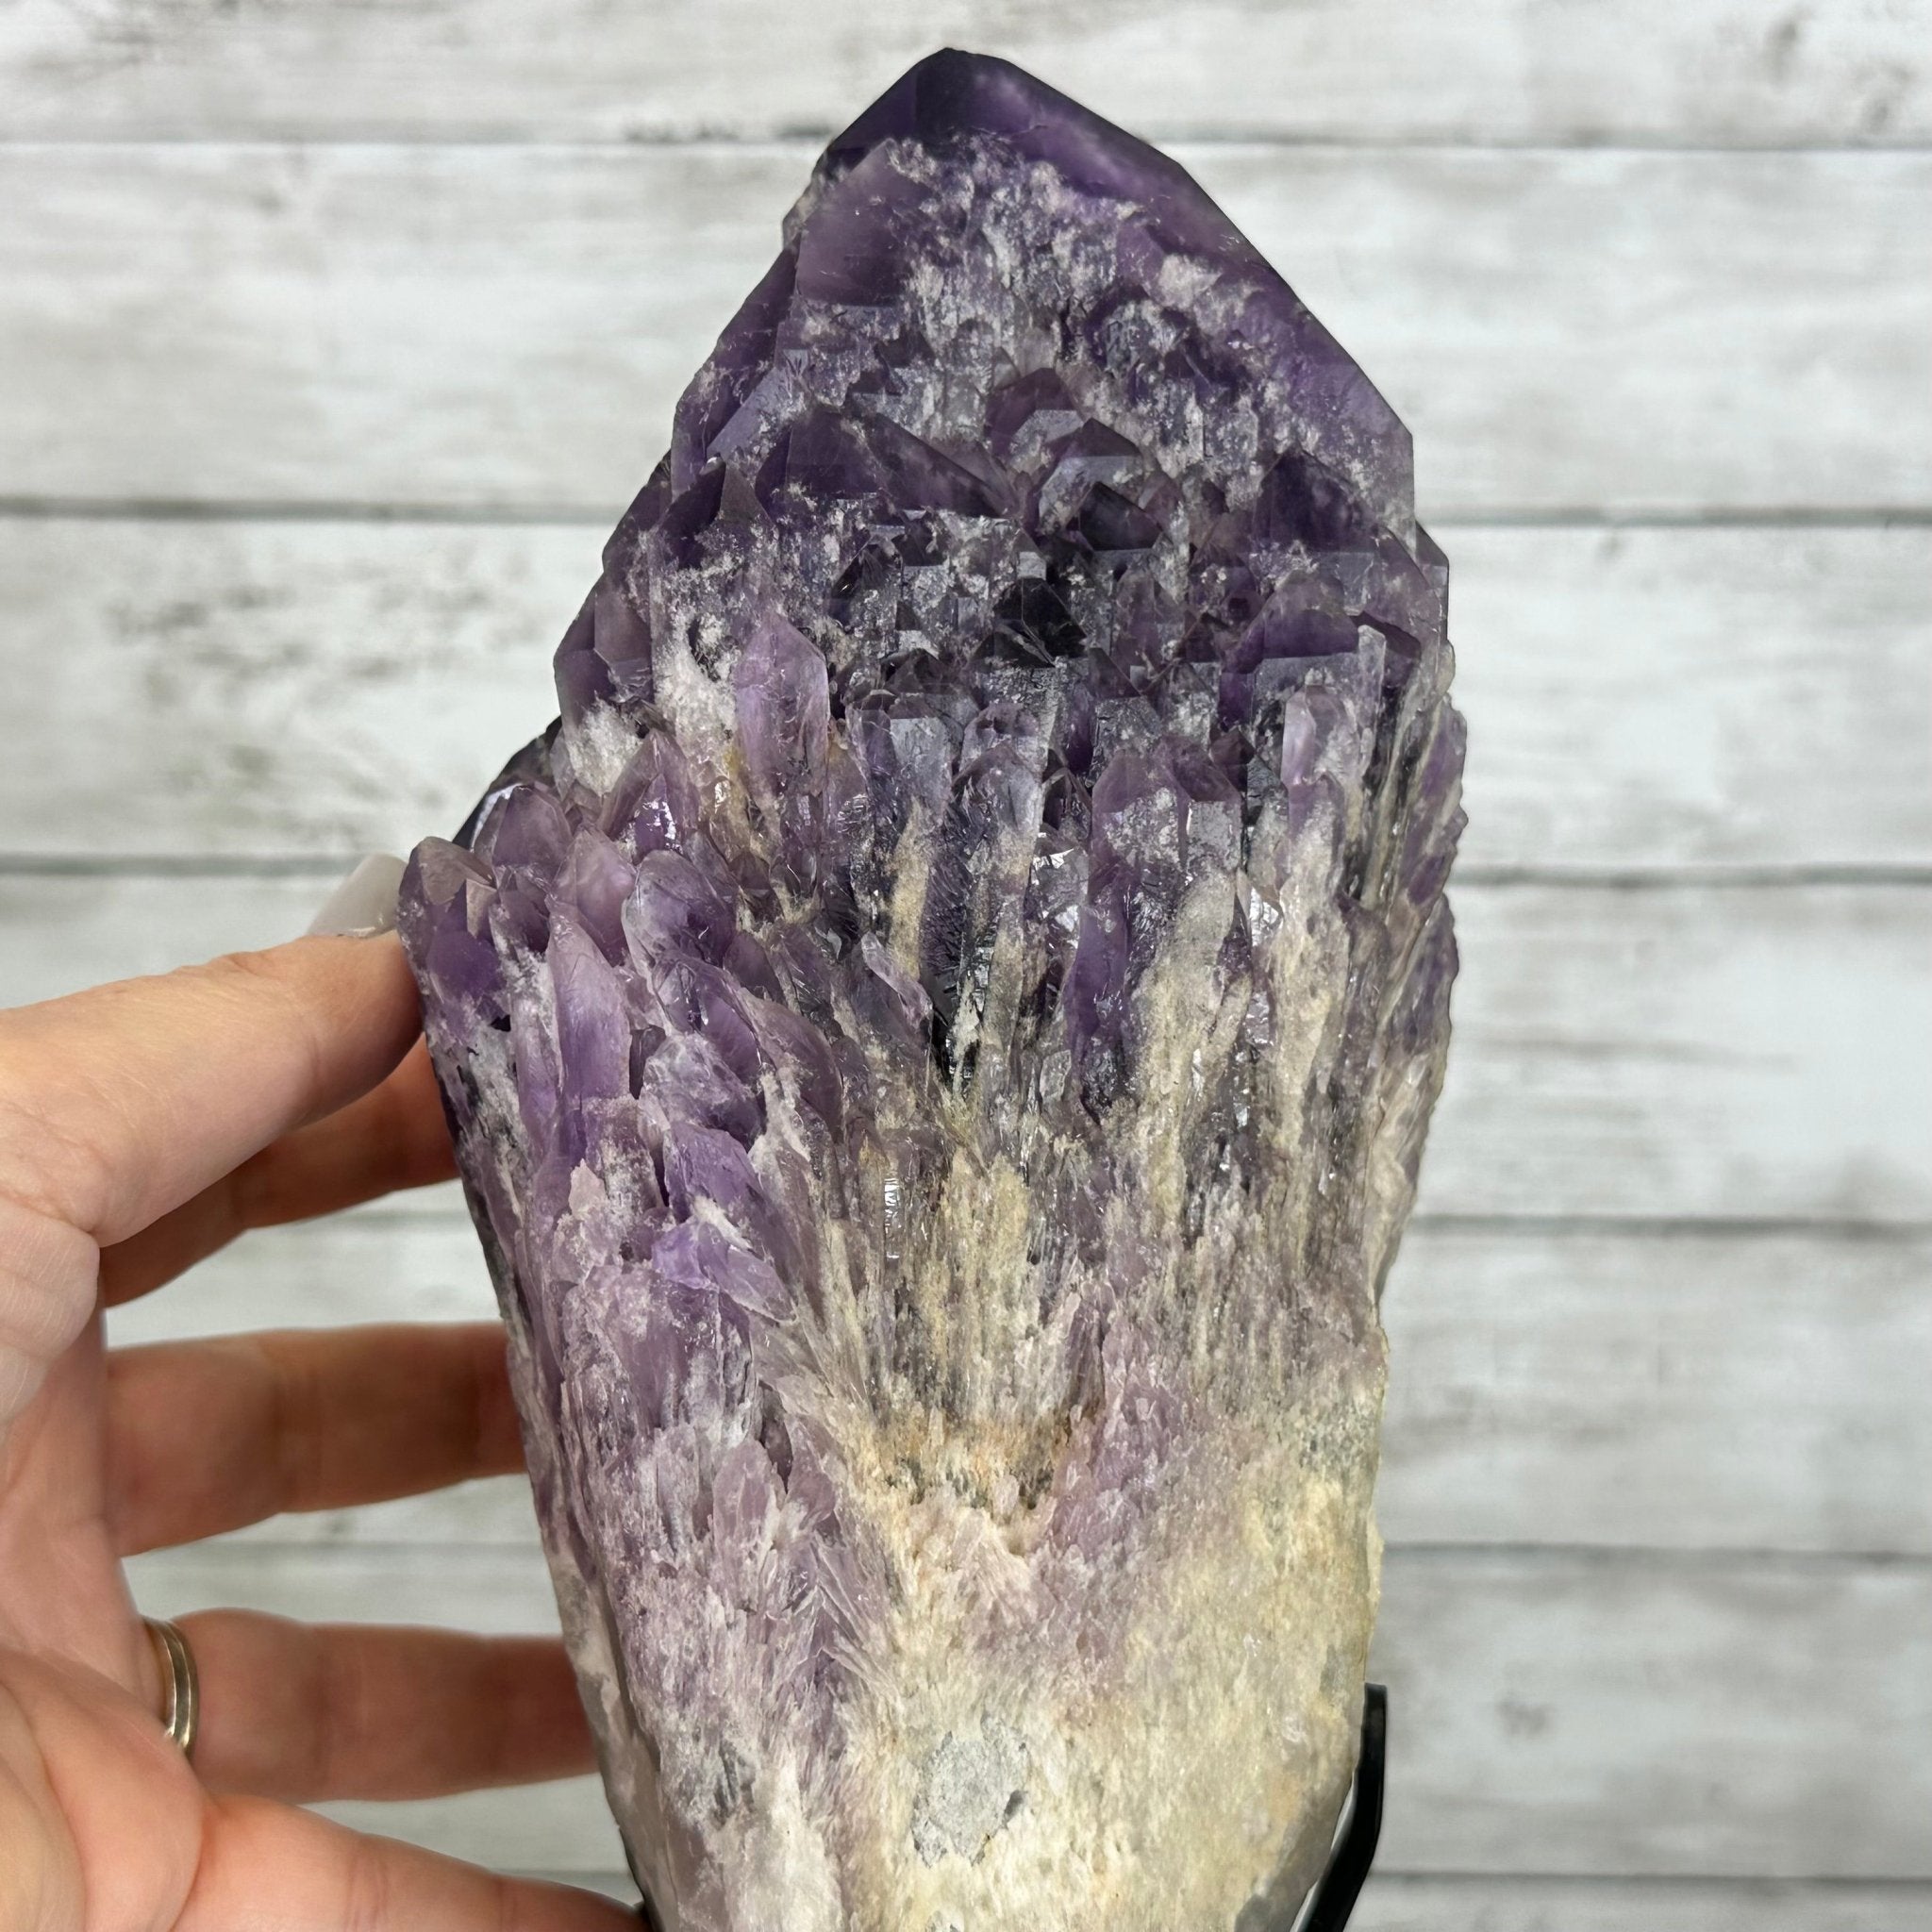 Large Chevron Amethyst Point on a Metal Stand, 9.2 lbs & 16.1" Tall #3121AM-002 - Brazil GemsBrazil GemsLarge Chevron Amethyst Point on a Metal Stand, 9.2 lbs & 16.1" Tall #3121AM-002Crystal Points3121AM-002